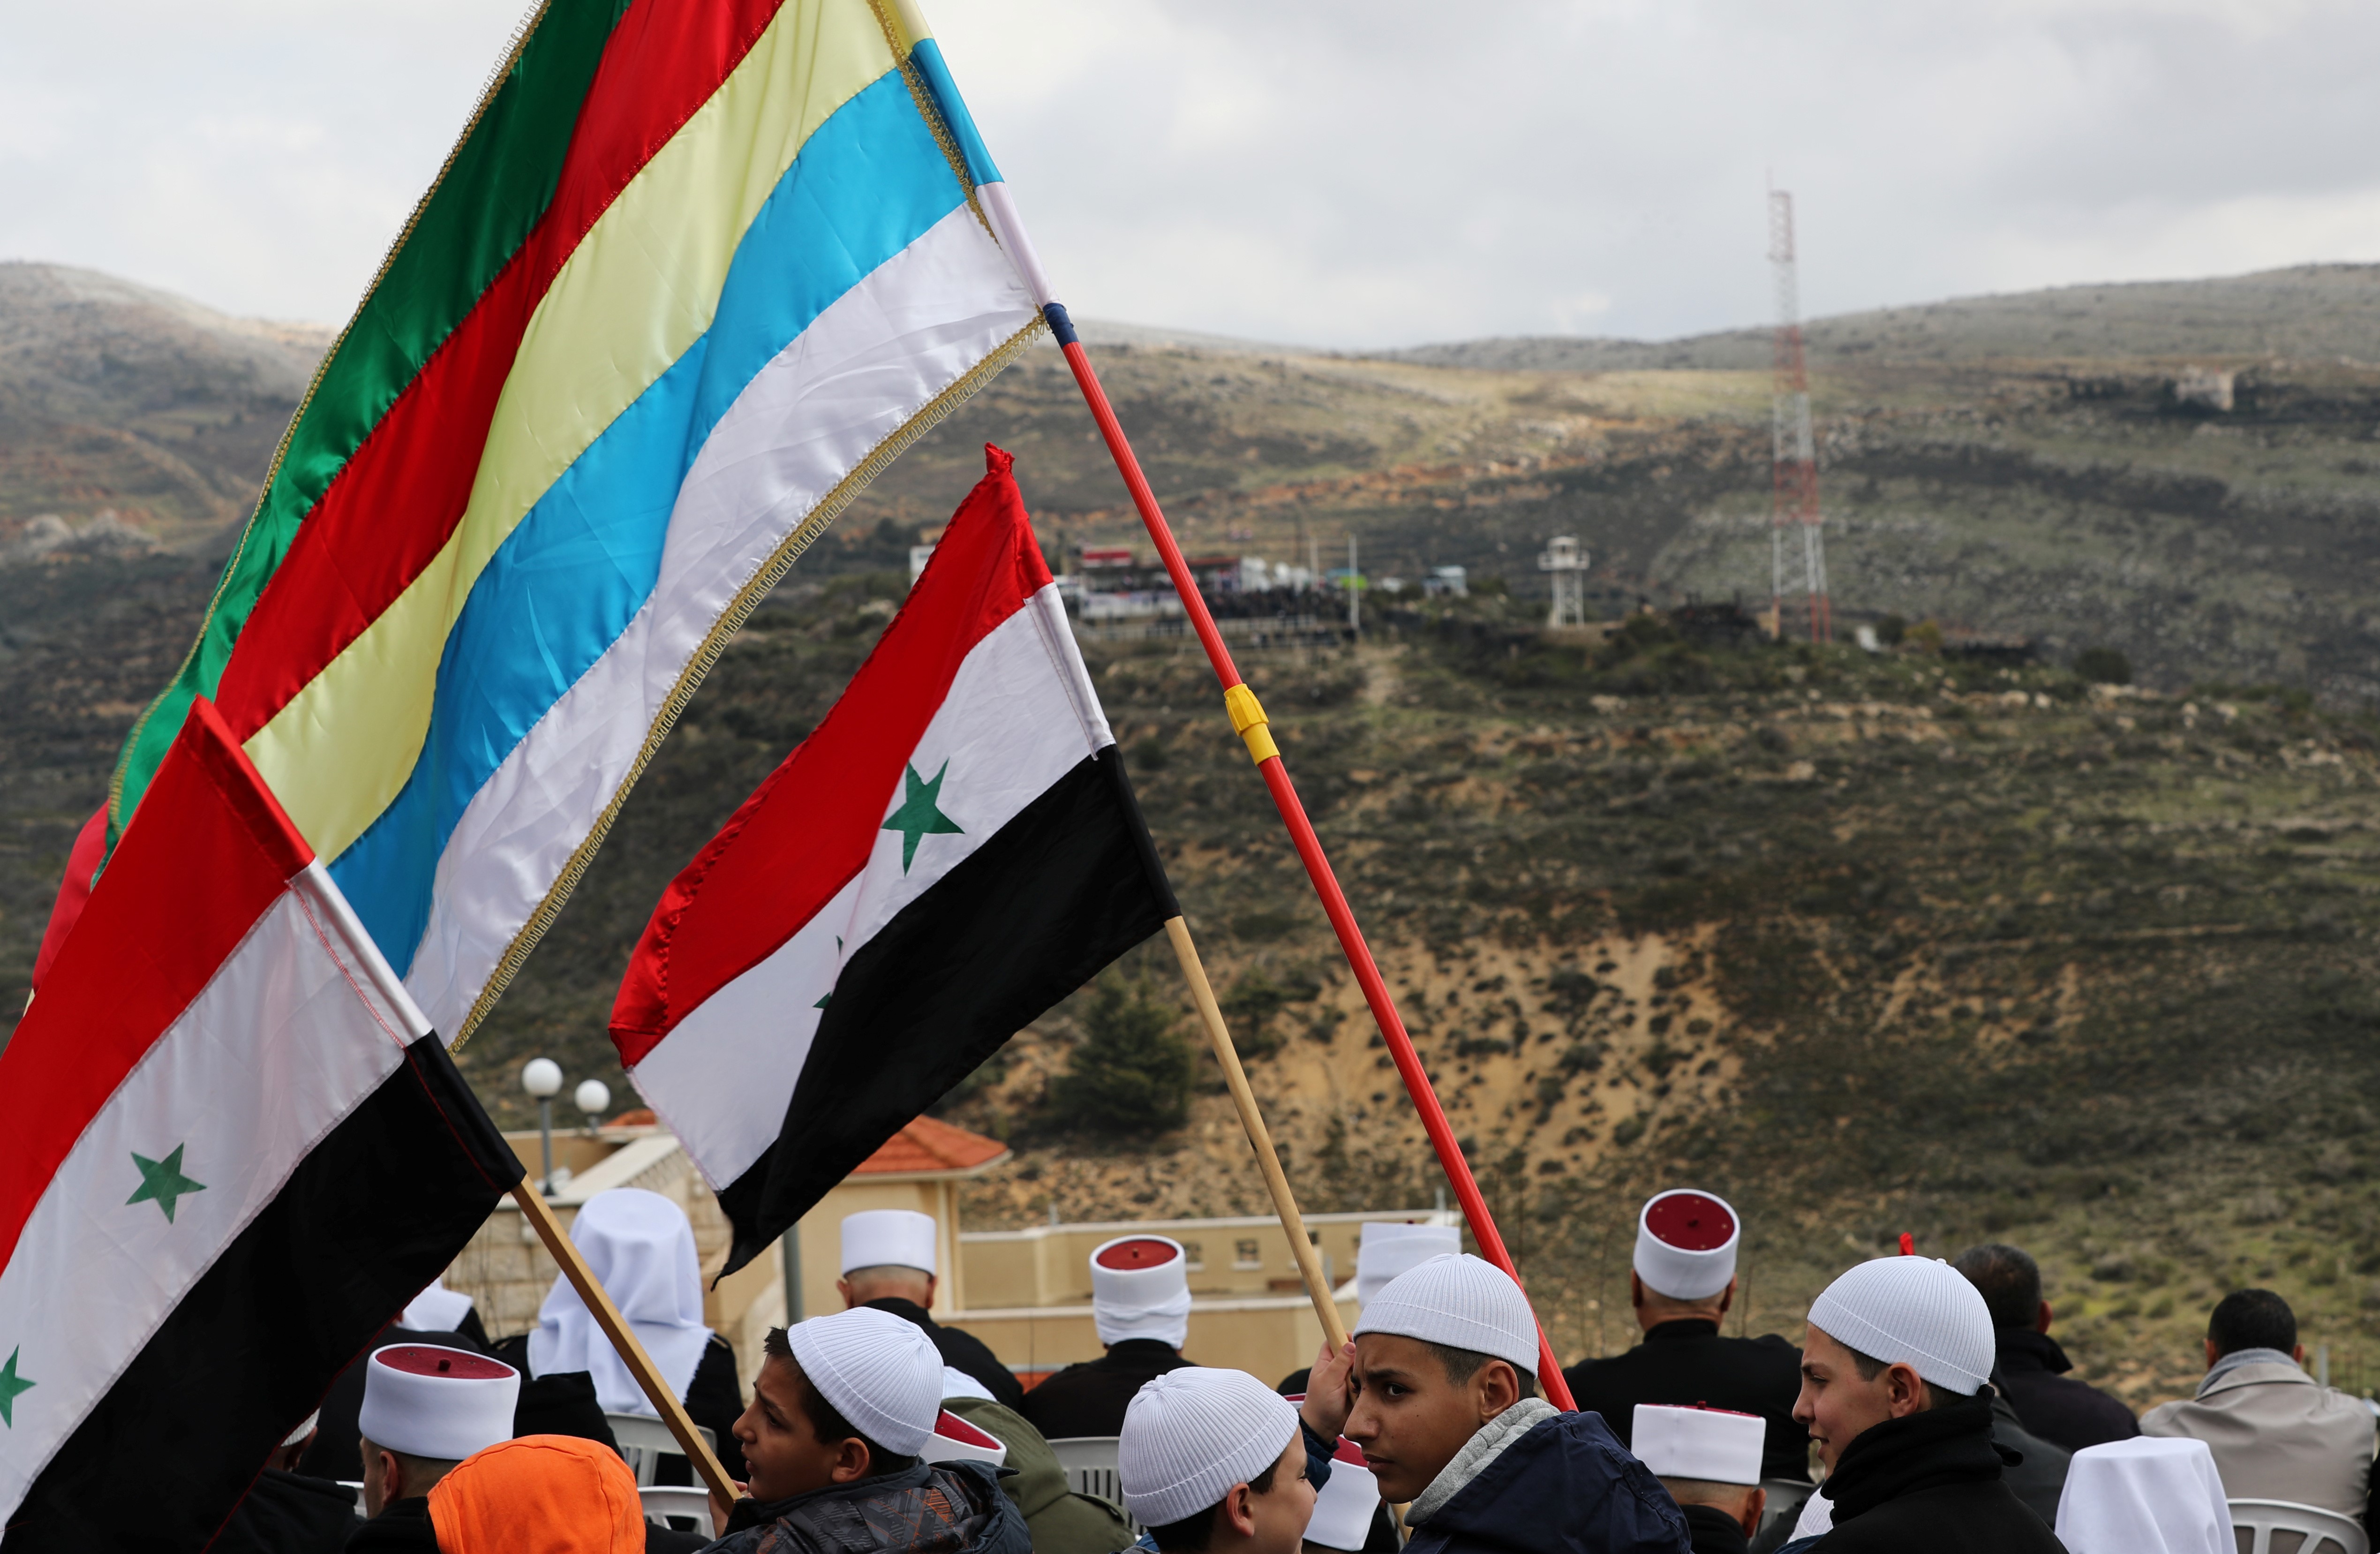 Members of the Druze community holds Syrian and Druze flags during a rally marking the anniversary of Israel's annexation of the Golan Heights on 14 February (REUTERS)